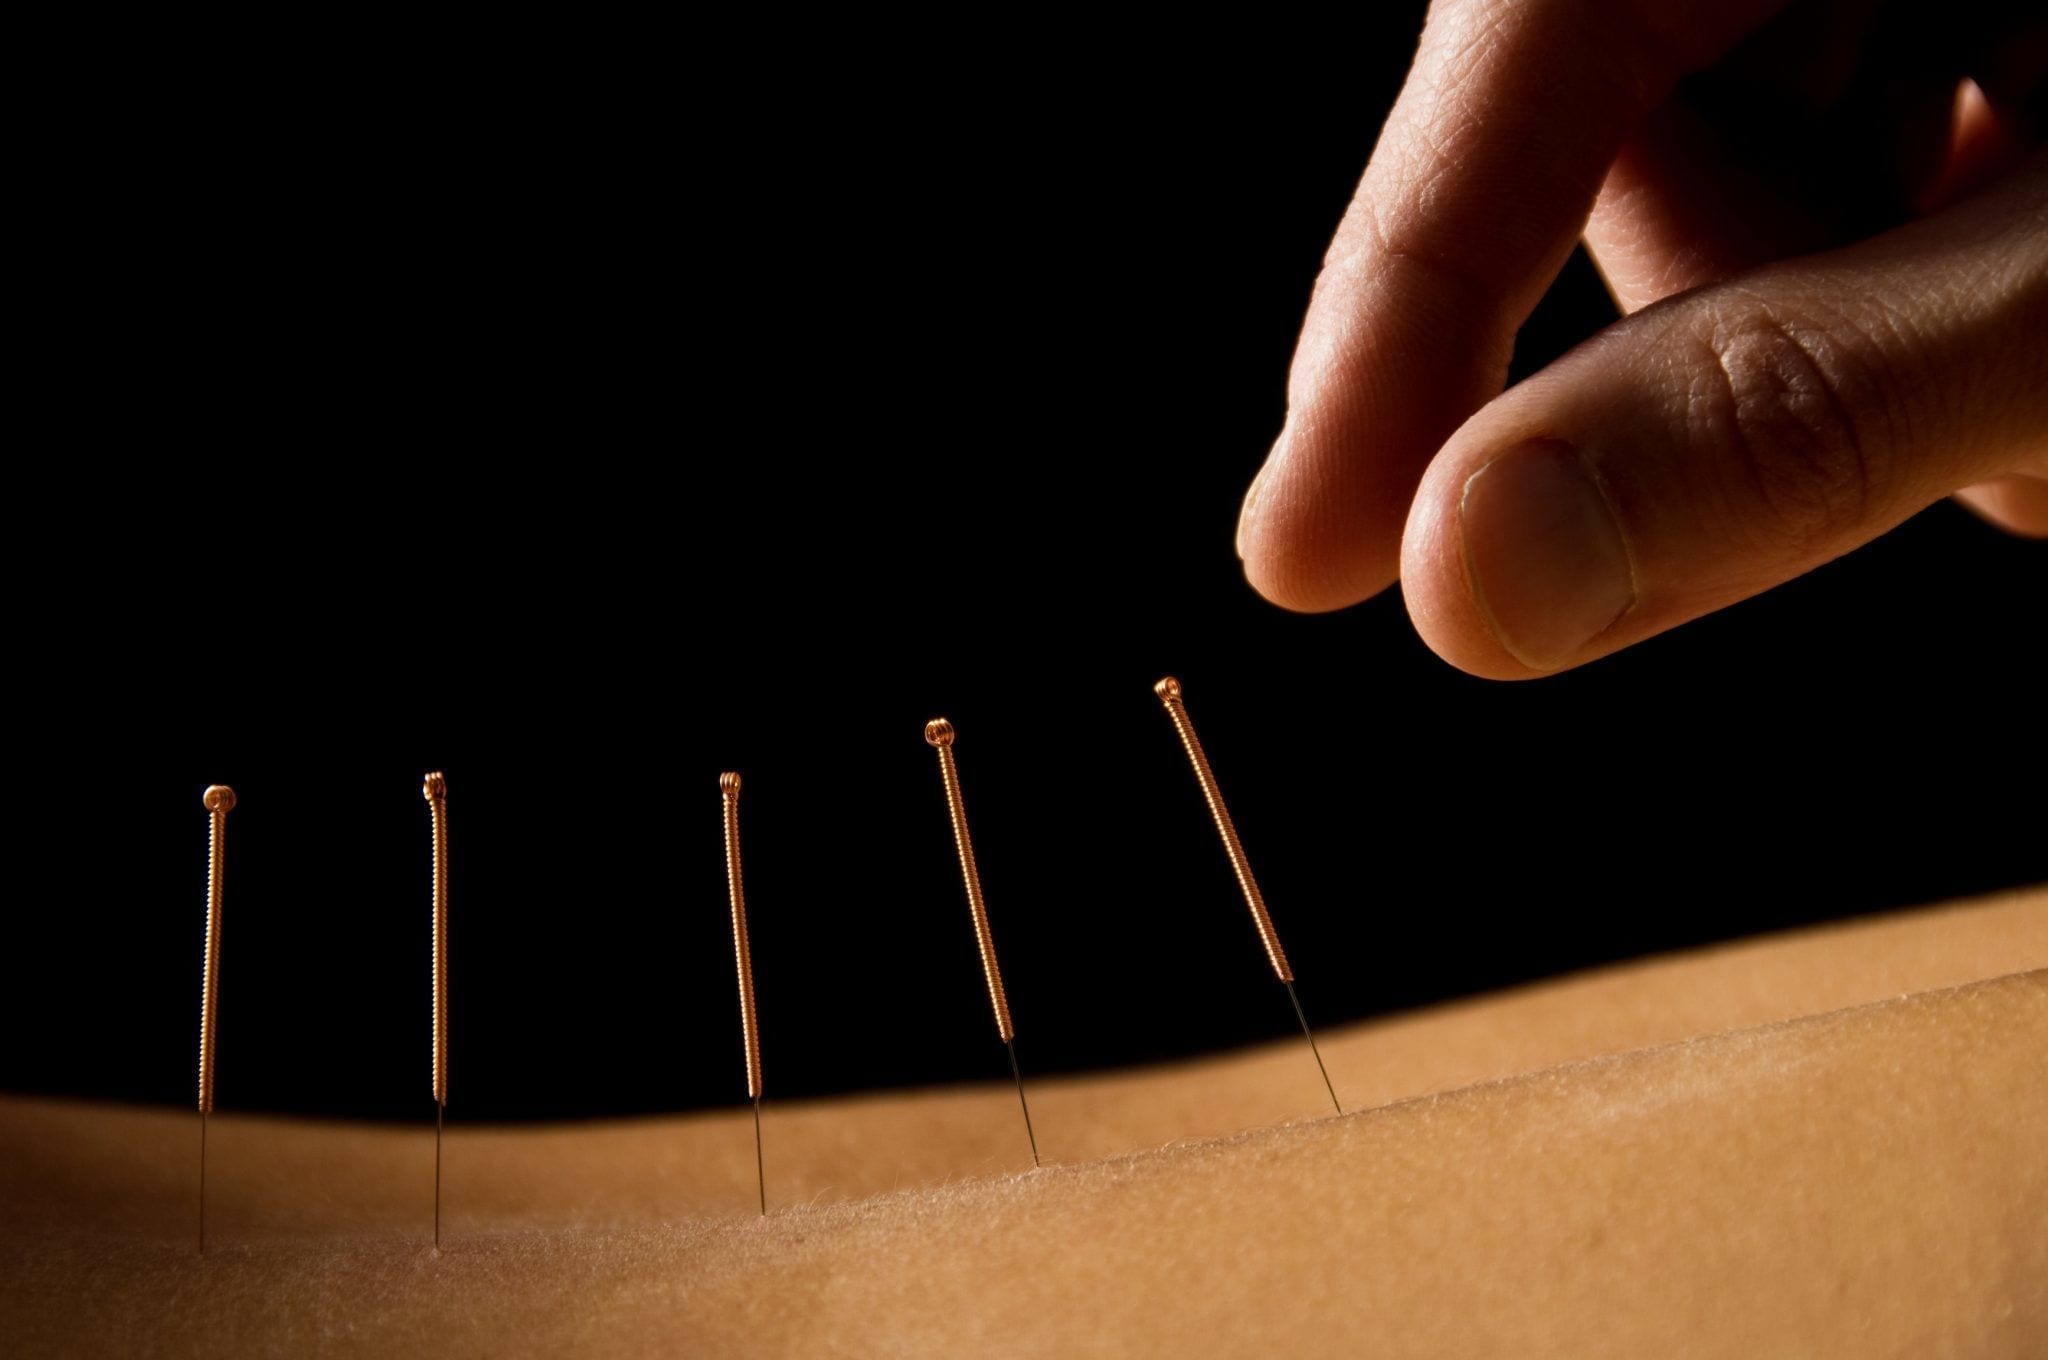 The Science of Acupuncture Safety: Risks, Harms, and Ancient Goodness